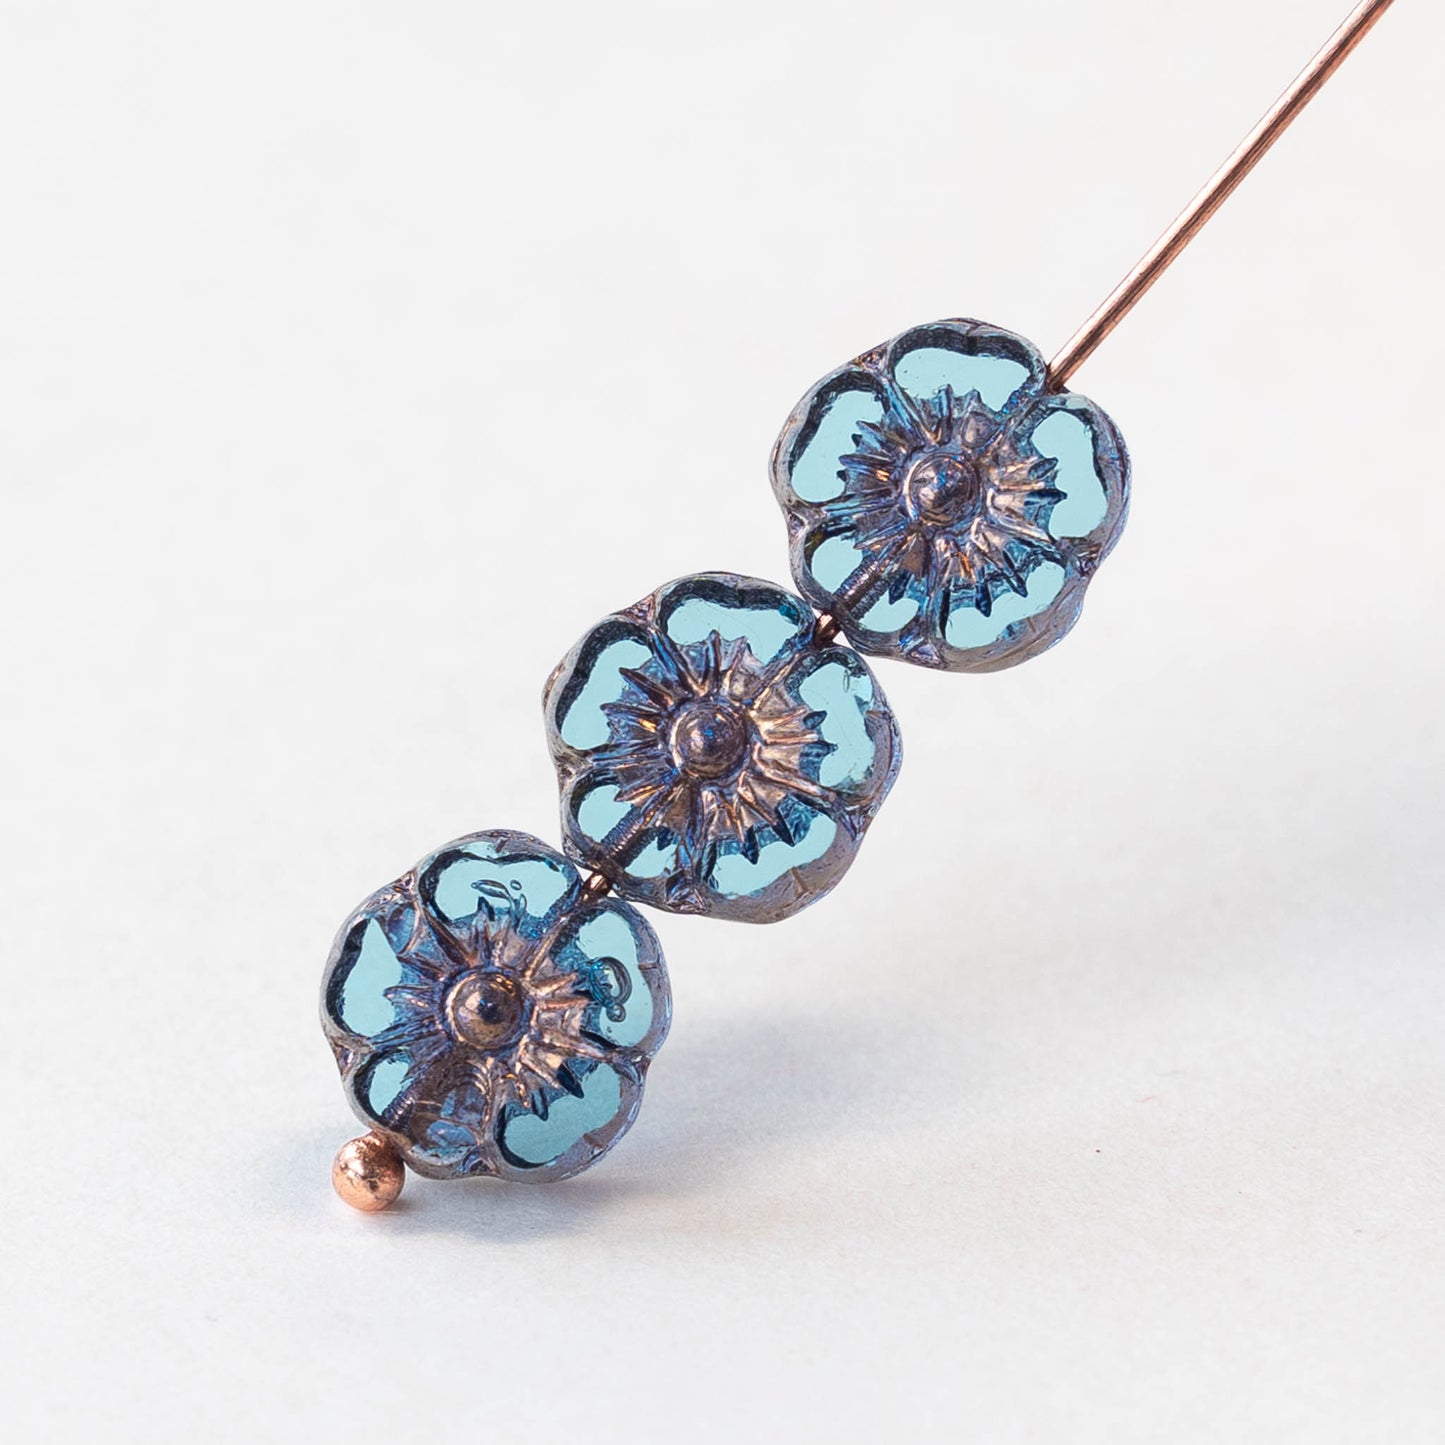 9mm Glass Flower Beads - Pale Blue with Copper Wash - 16 beads